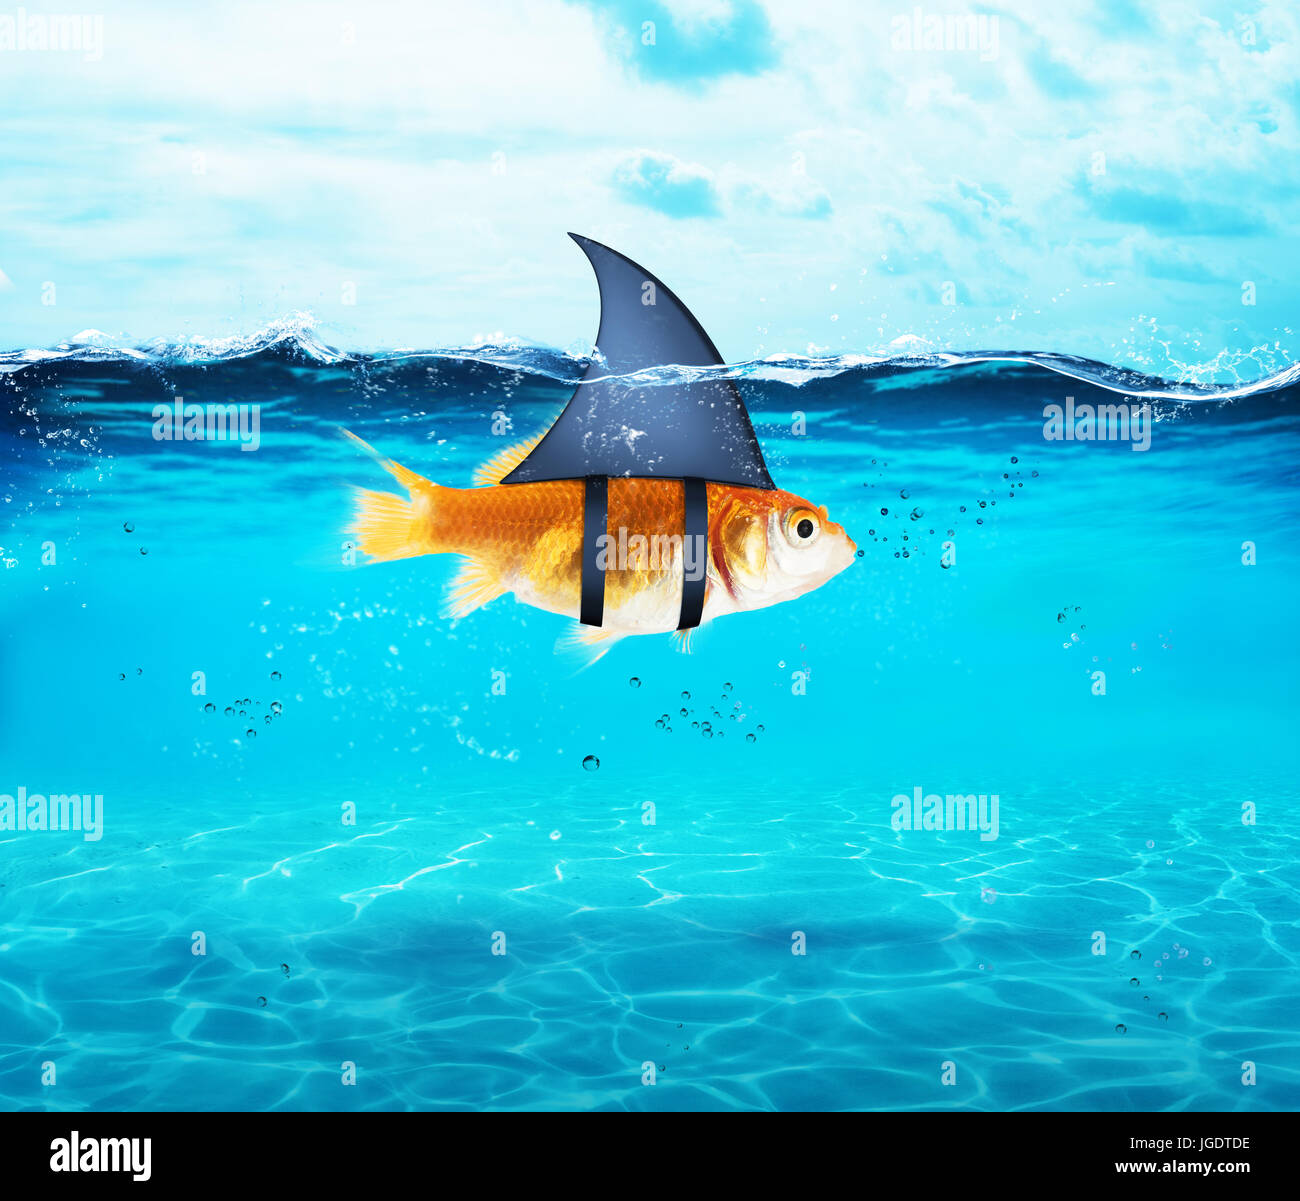 Goldfish acting as shark to terrorize the enemies. Concept of competition and bravery Stock Photo